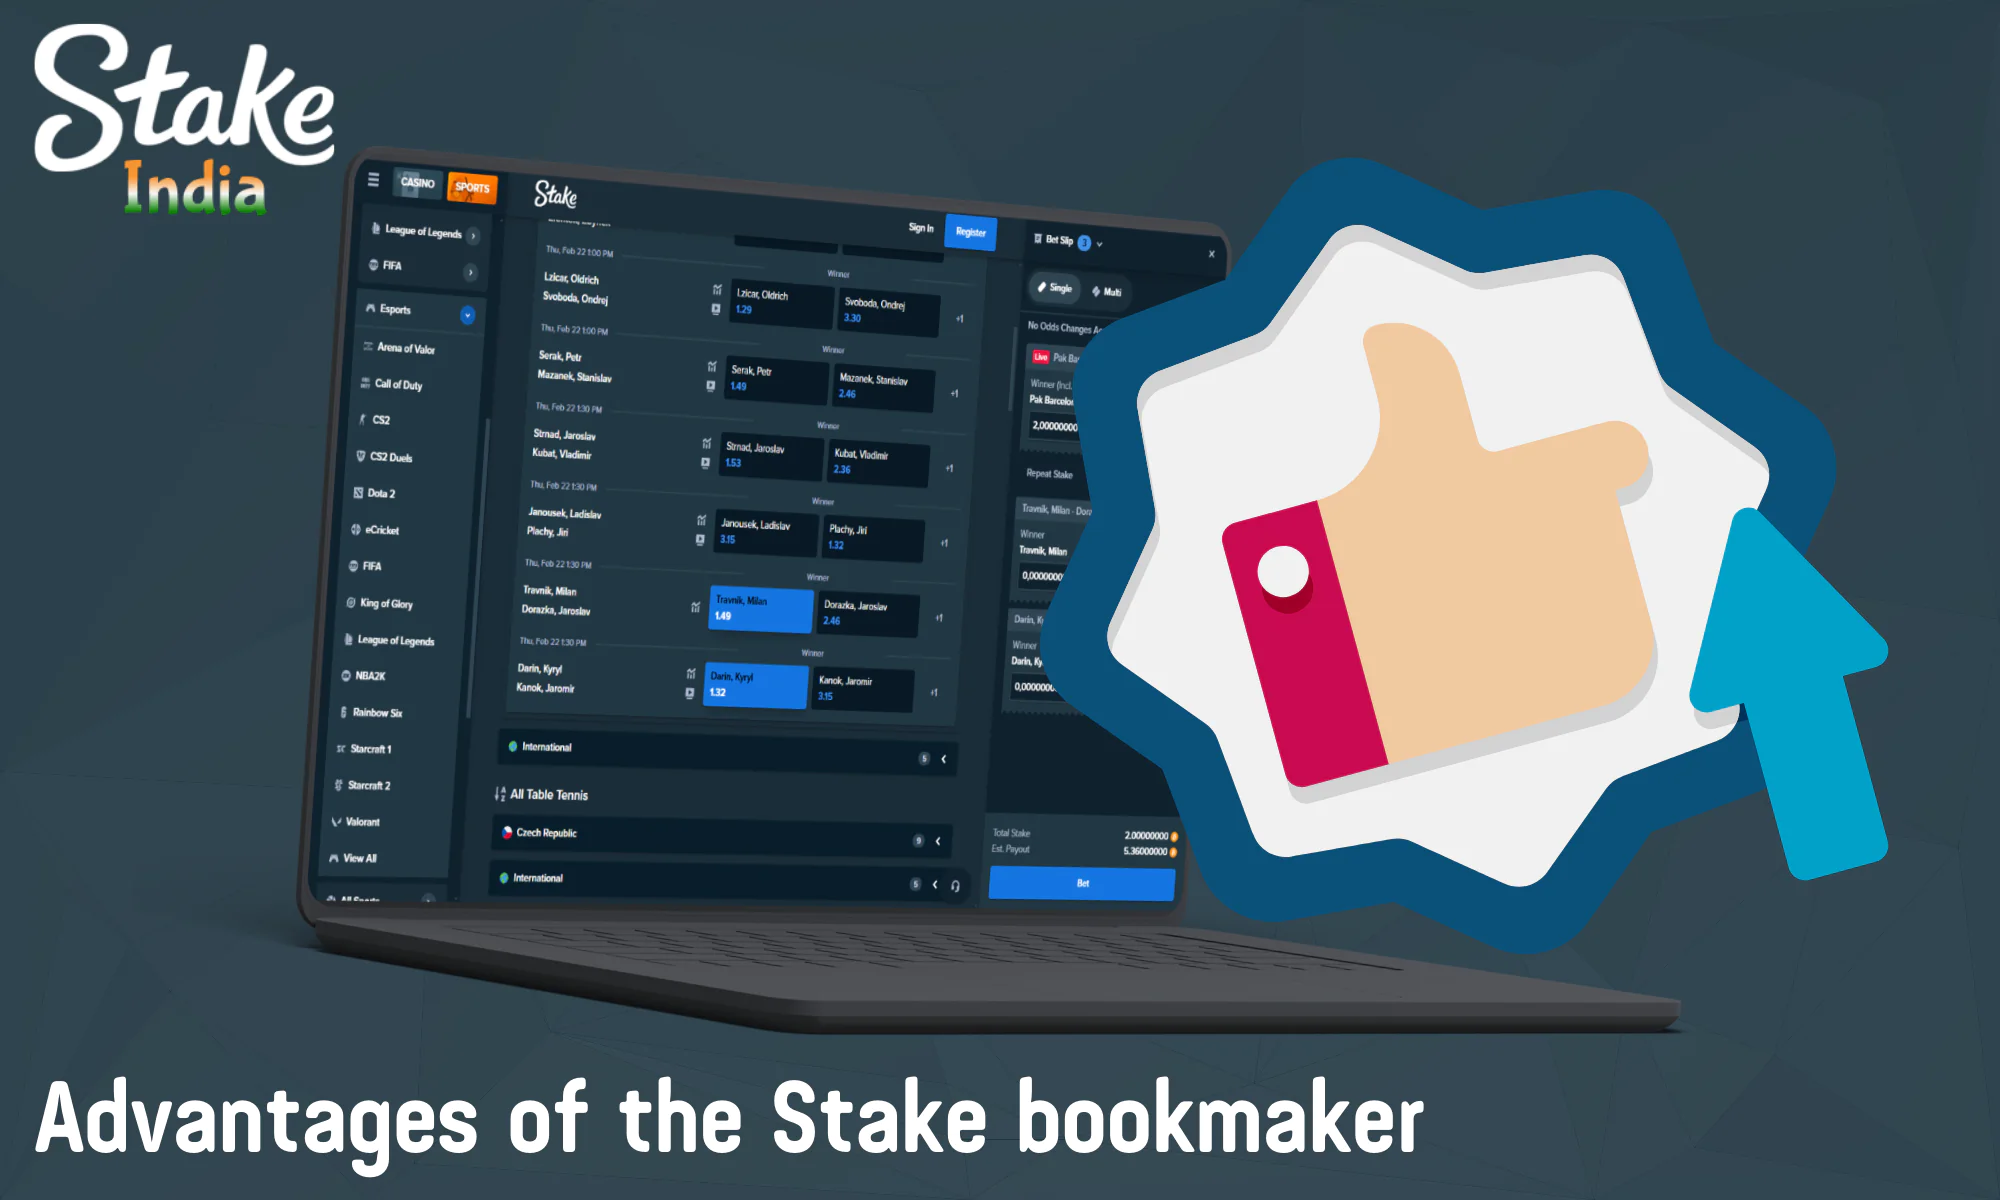 The main advantages of the Stake bookmaker